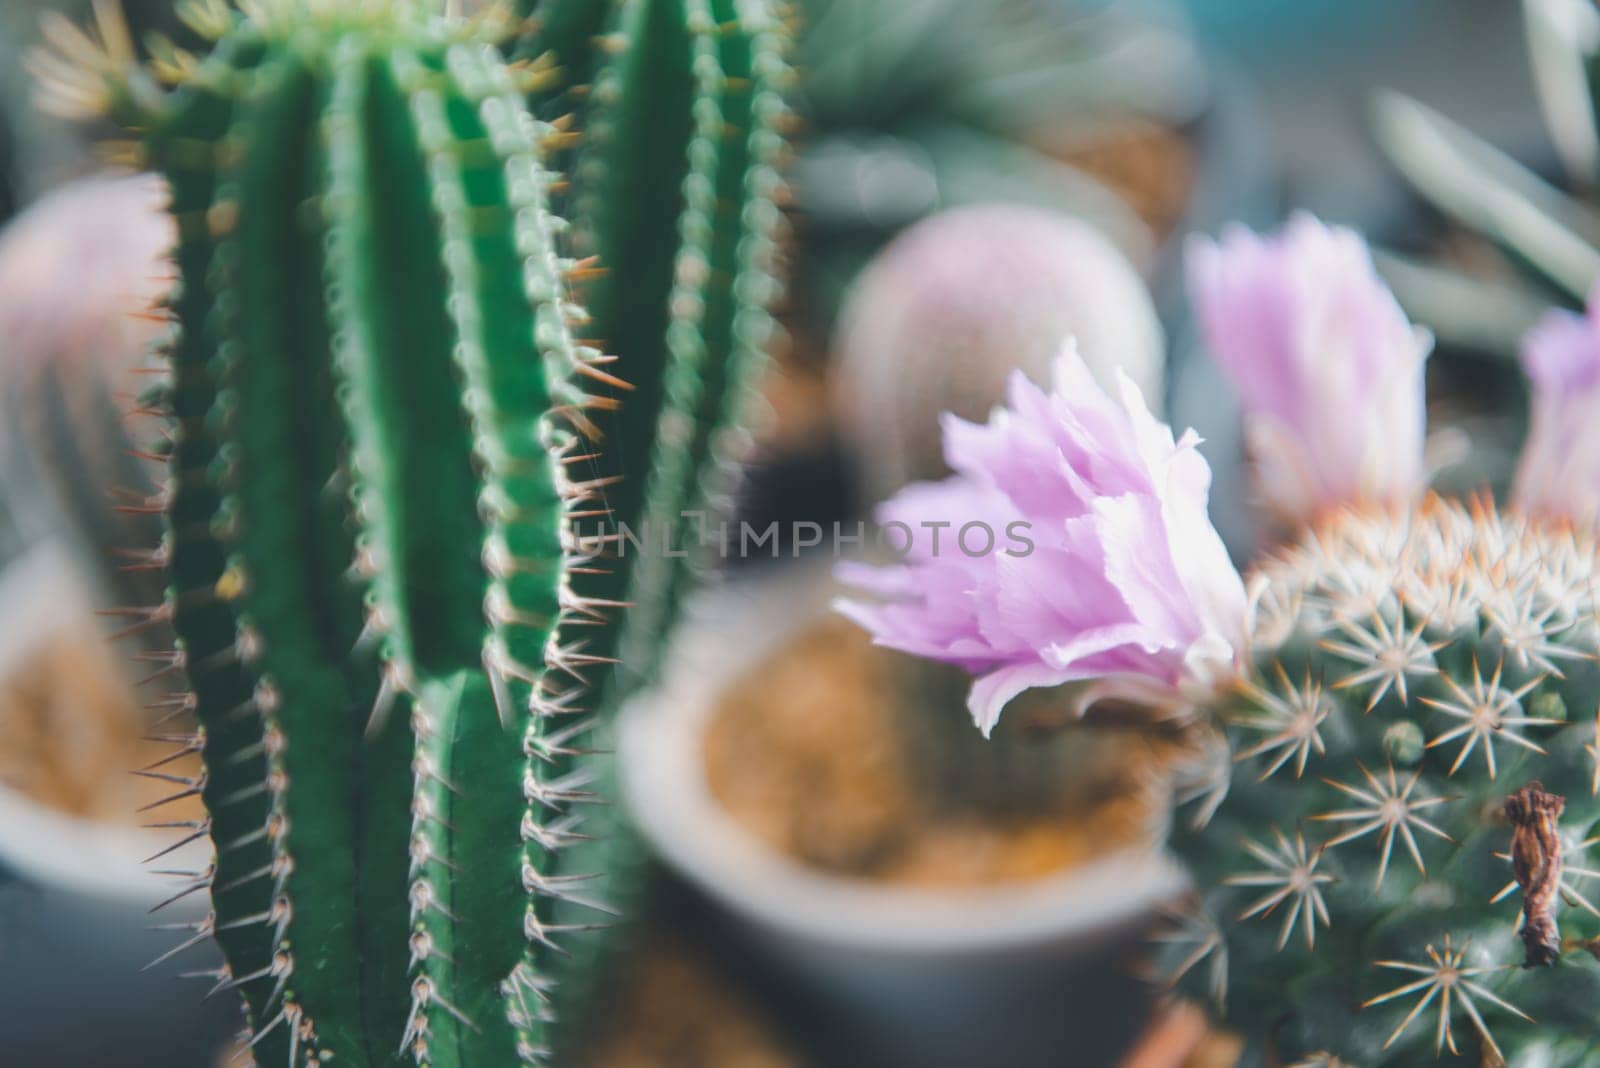 Cactus (Gymno ,Gymnocalycium) and Cactus flowers in cactus garden many size and colors popular use for decorative in house or flower shop